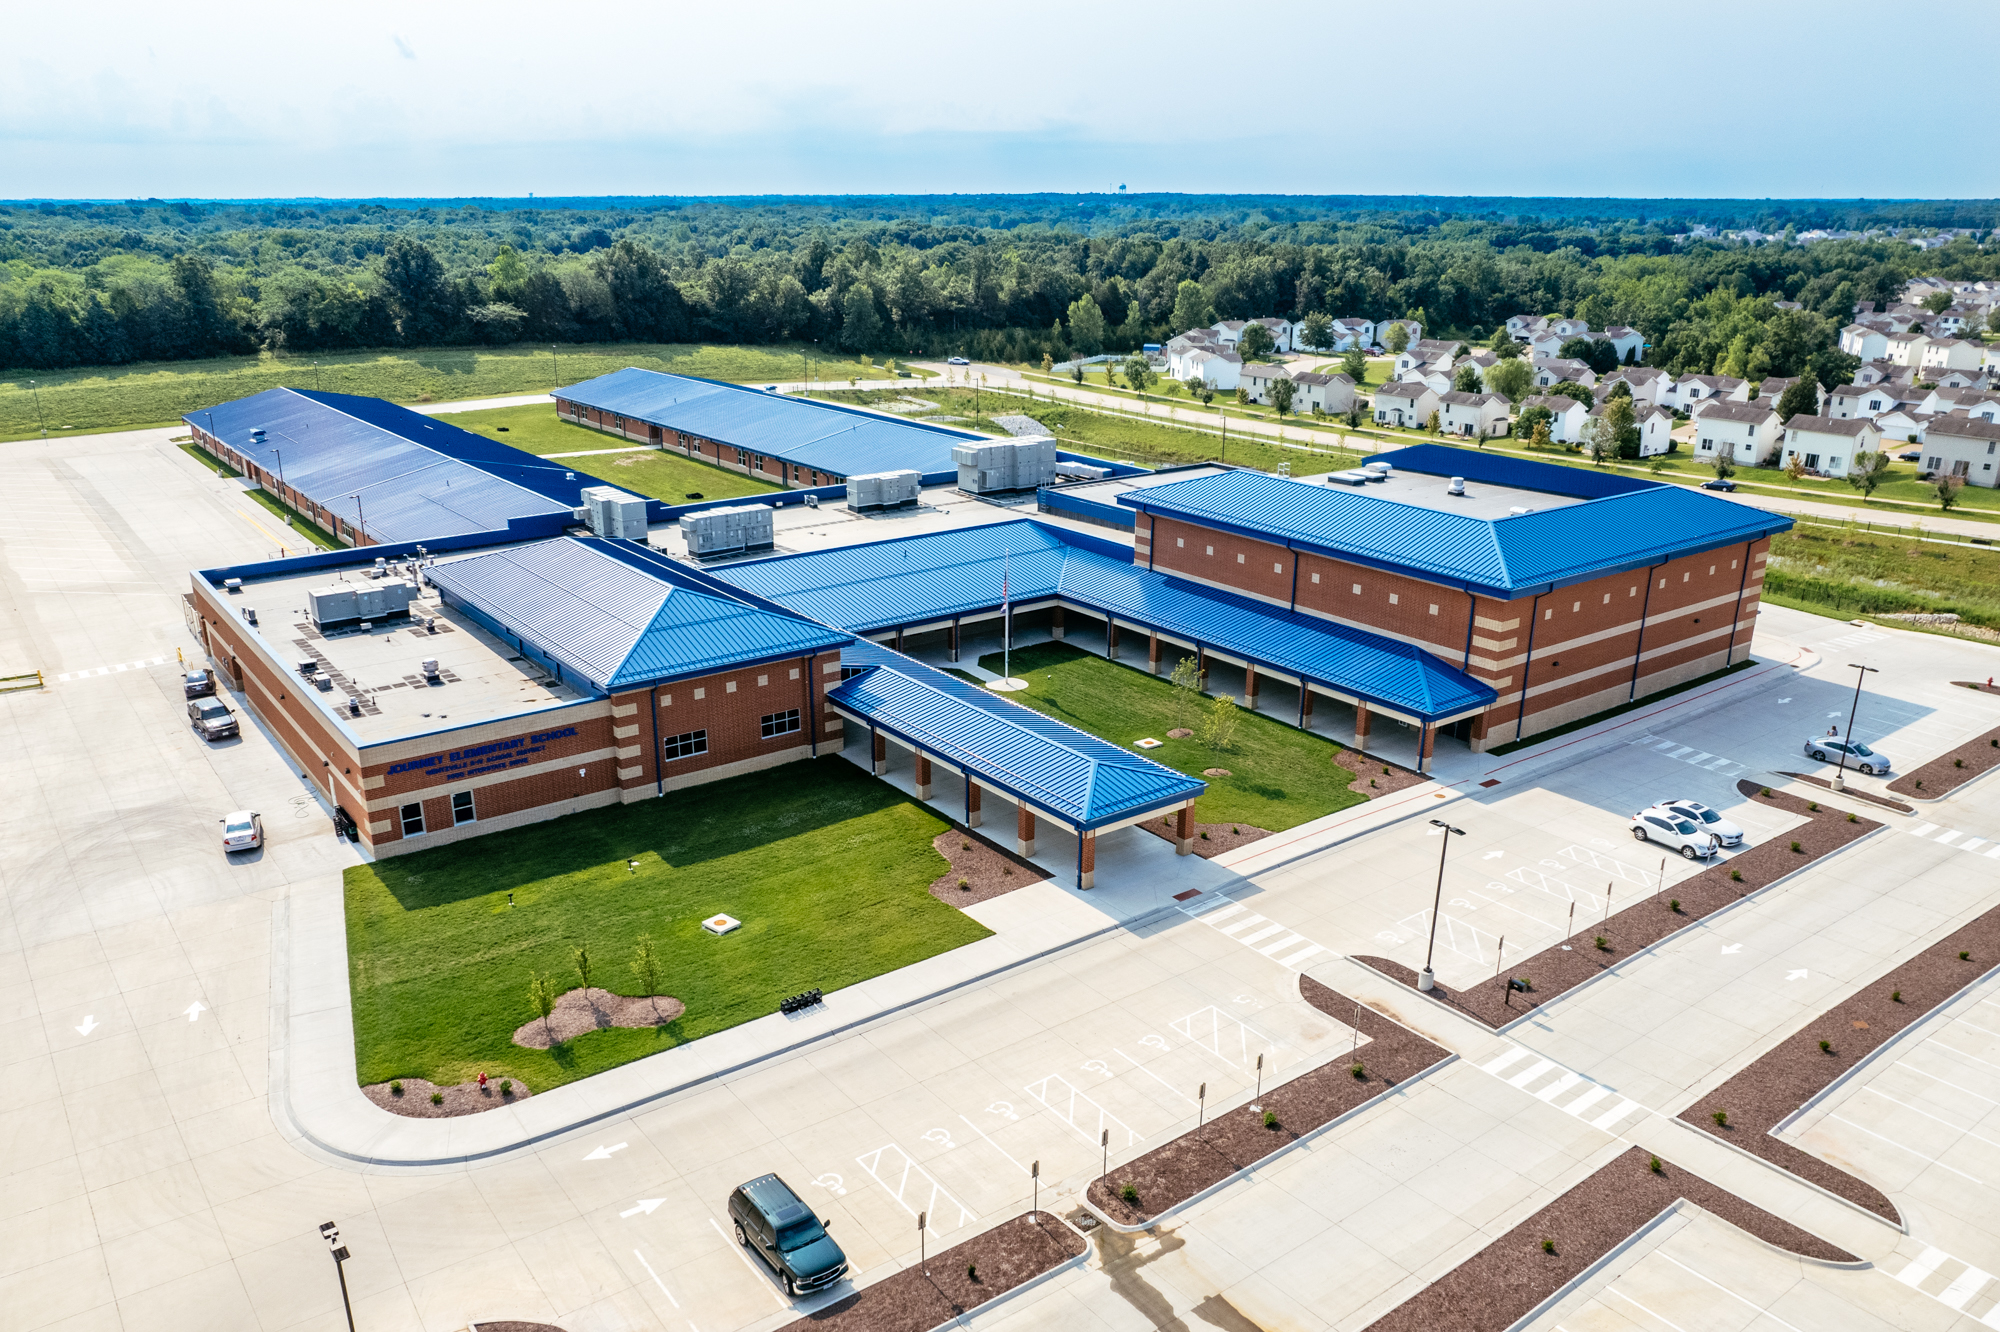 Elementary School Standing Seam Roof Built To Pass the Test of Time